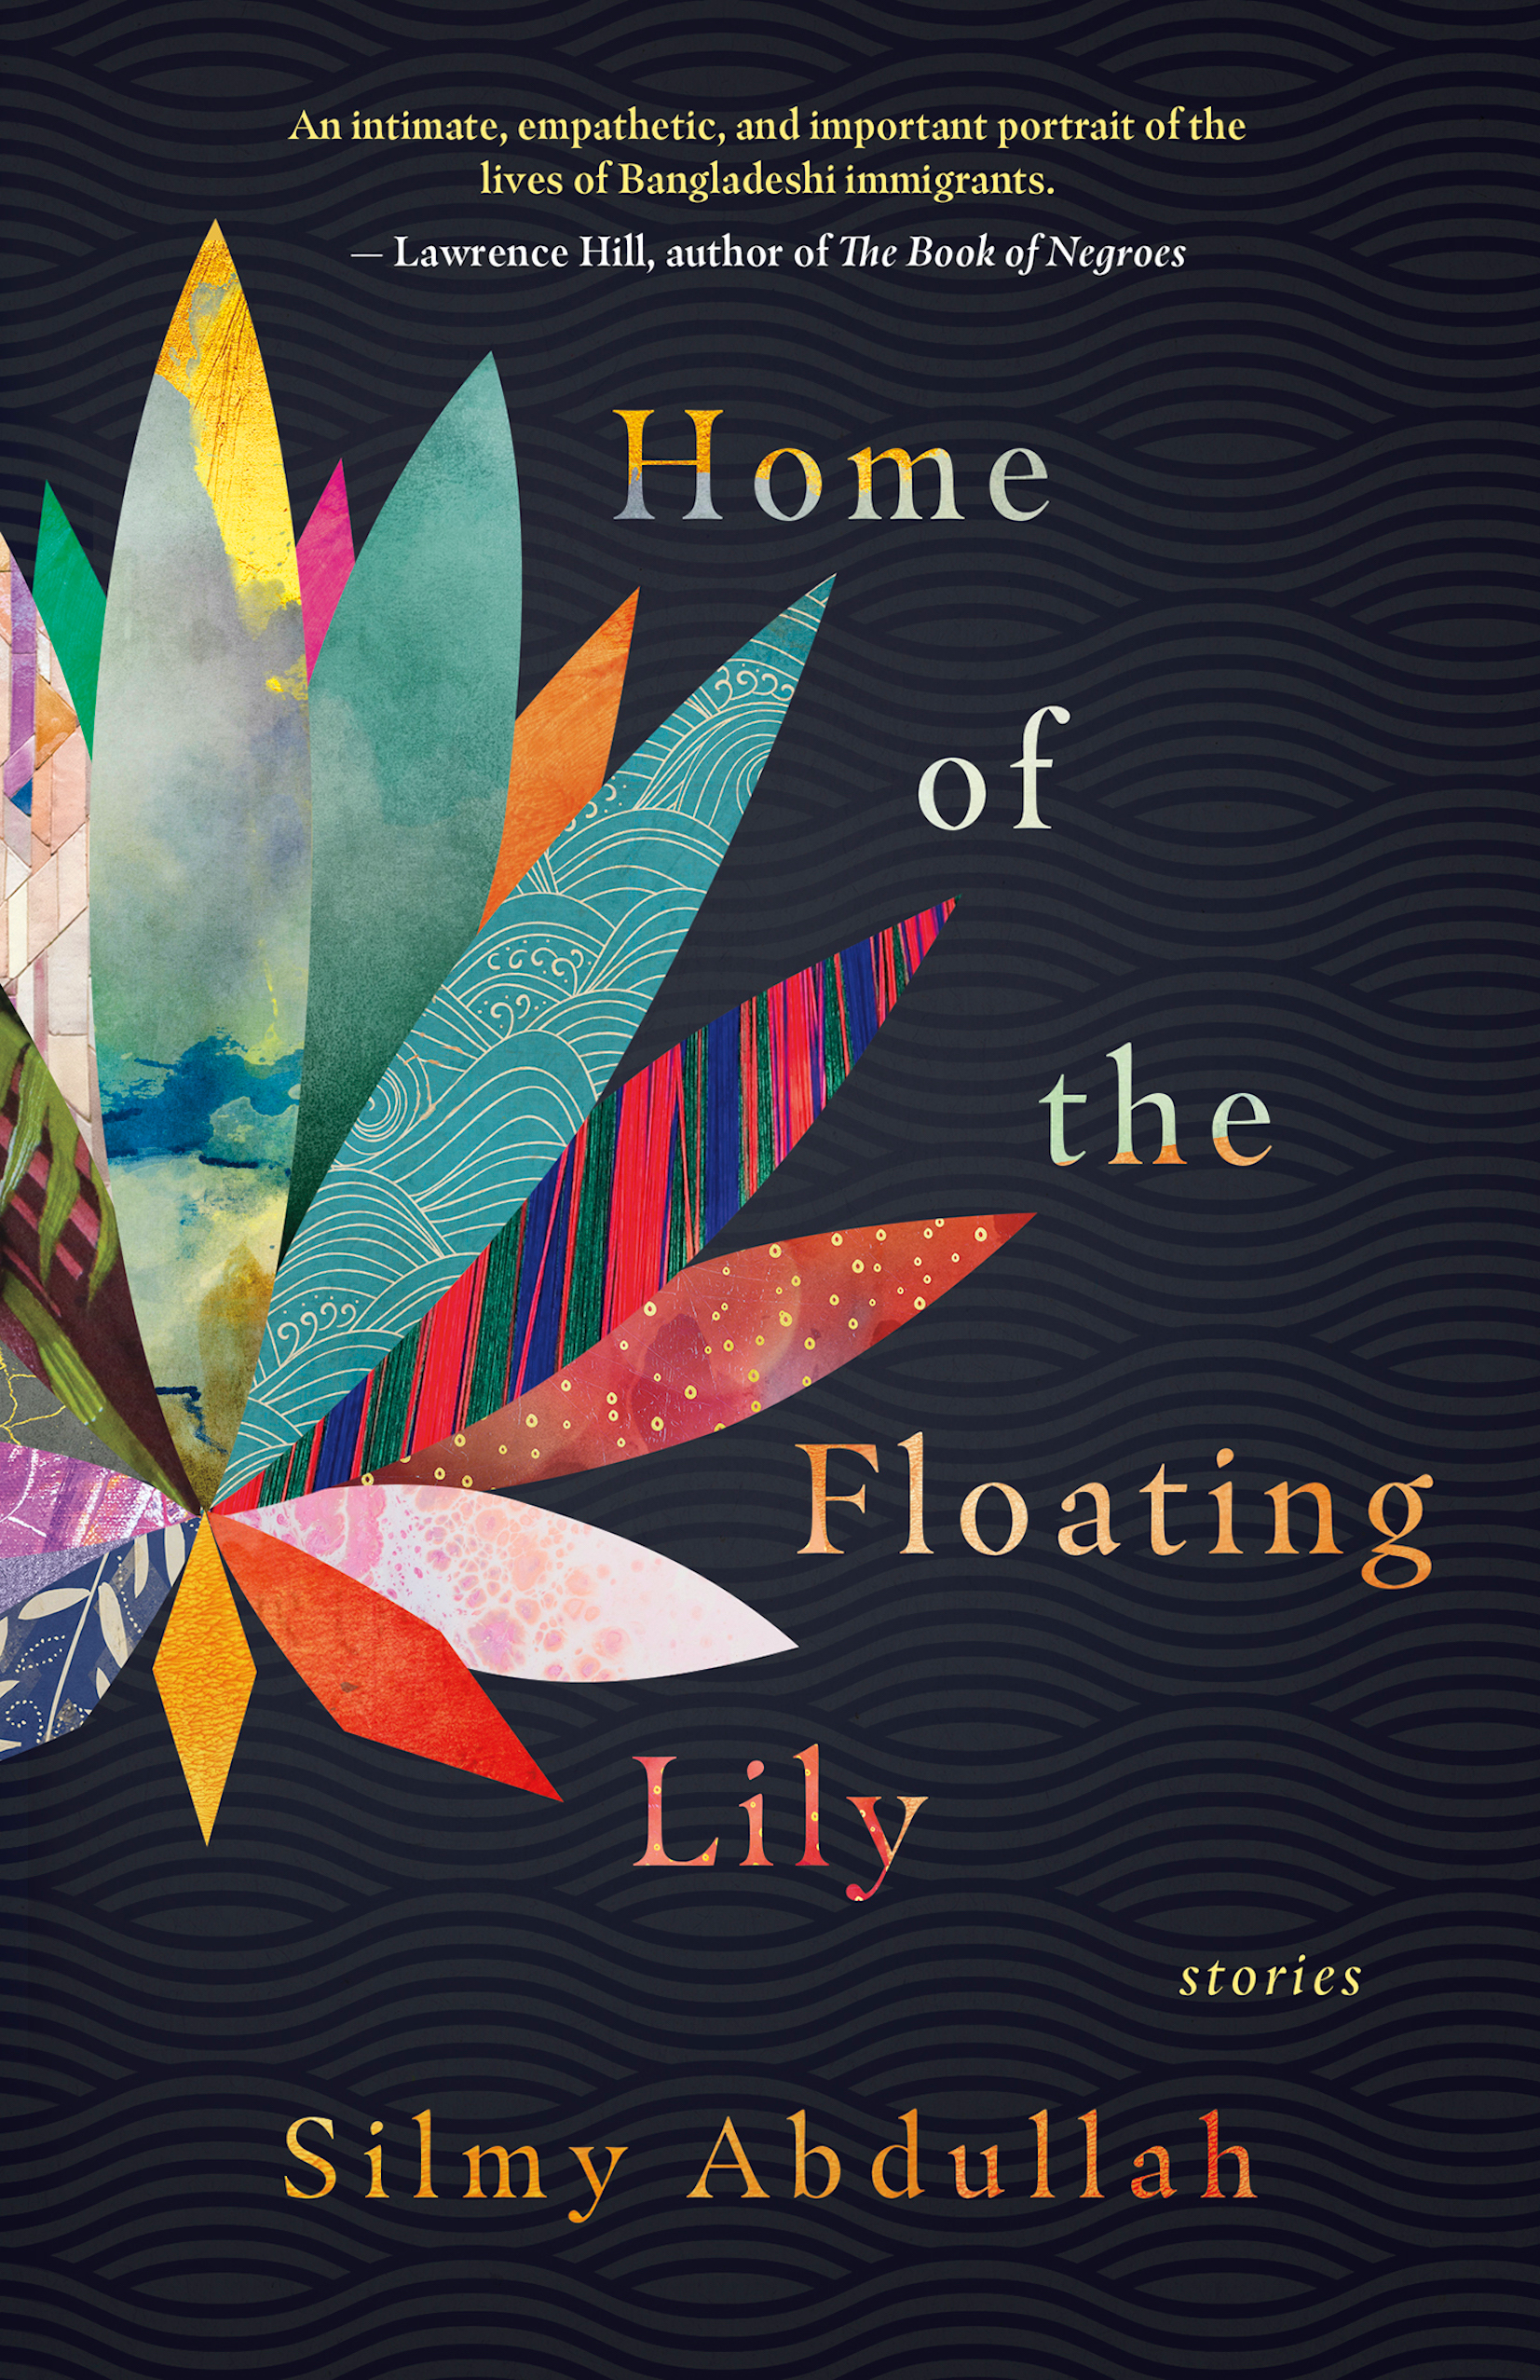 Home of the Floating Lily book cover